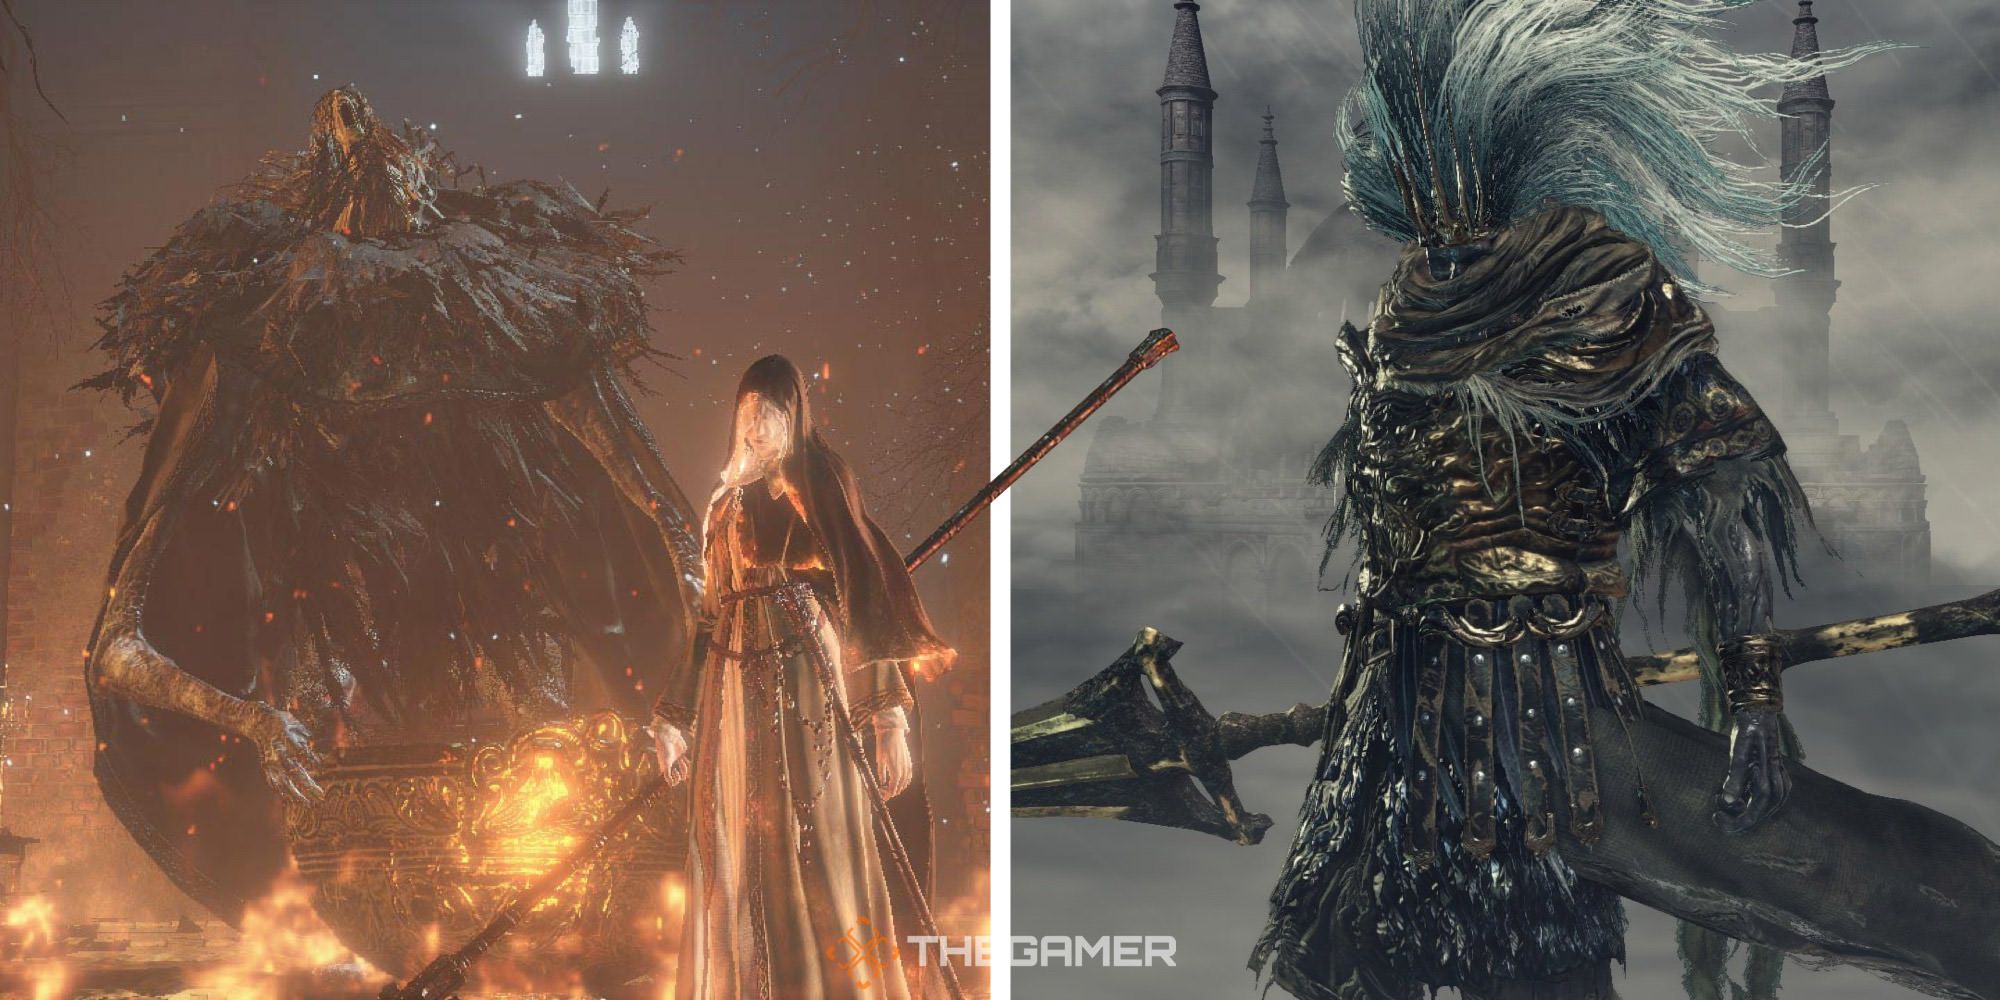 Faderlig mus bent Dark Souls 3: Optional Events, Bosses, And NPCs In The Game